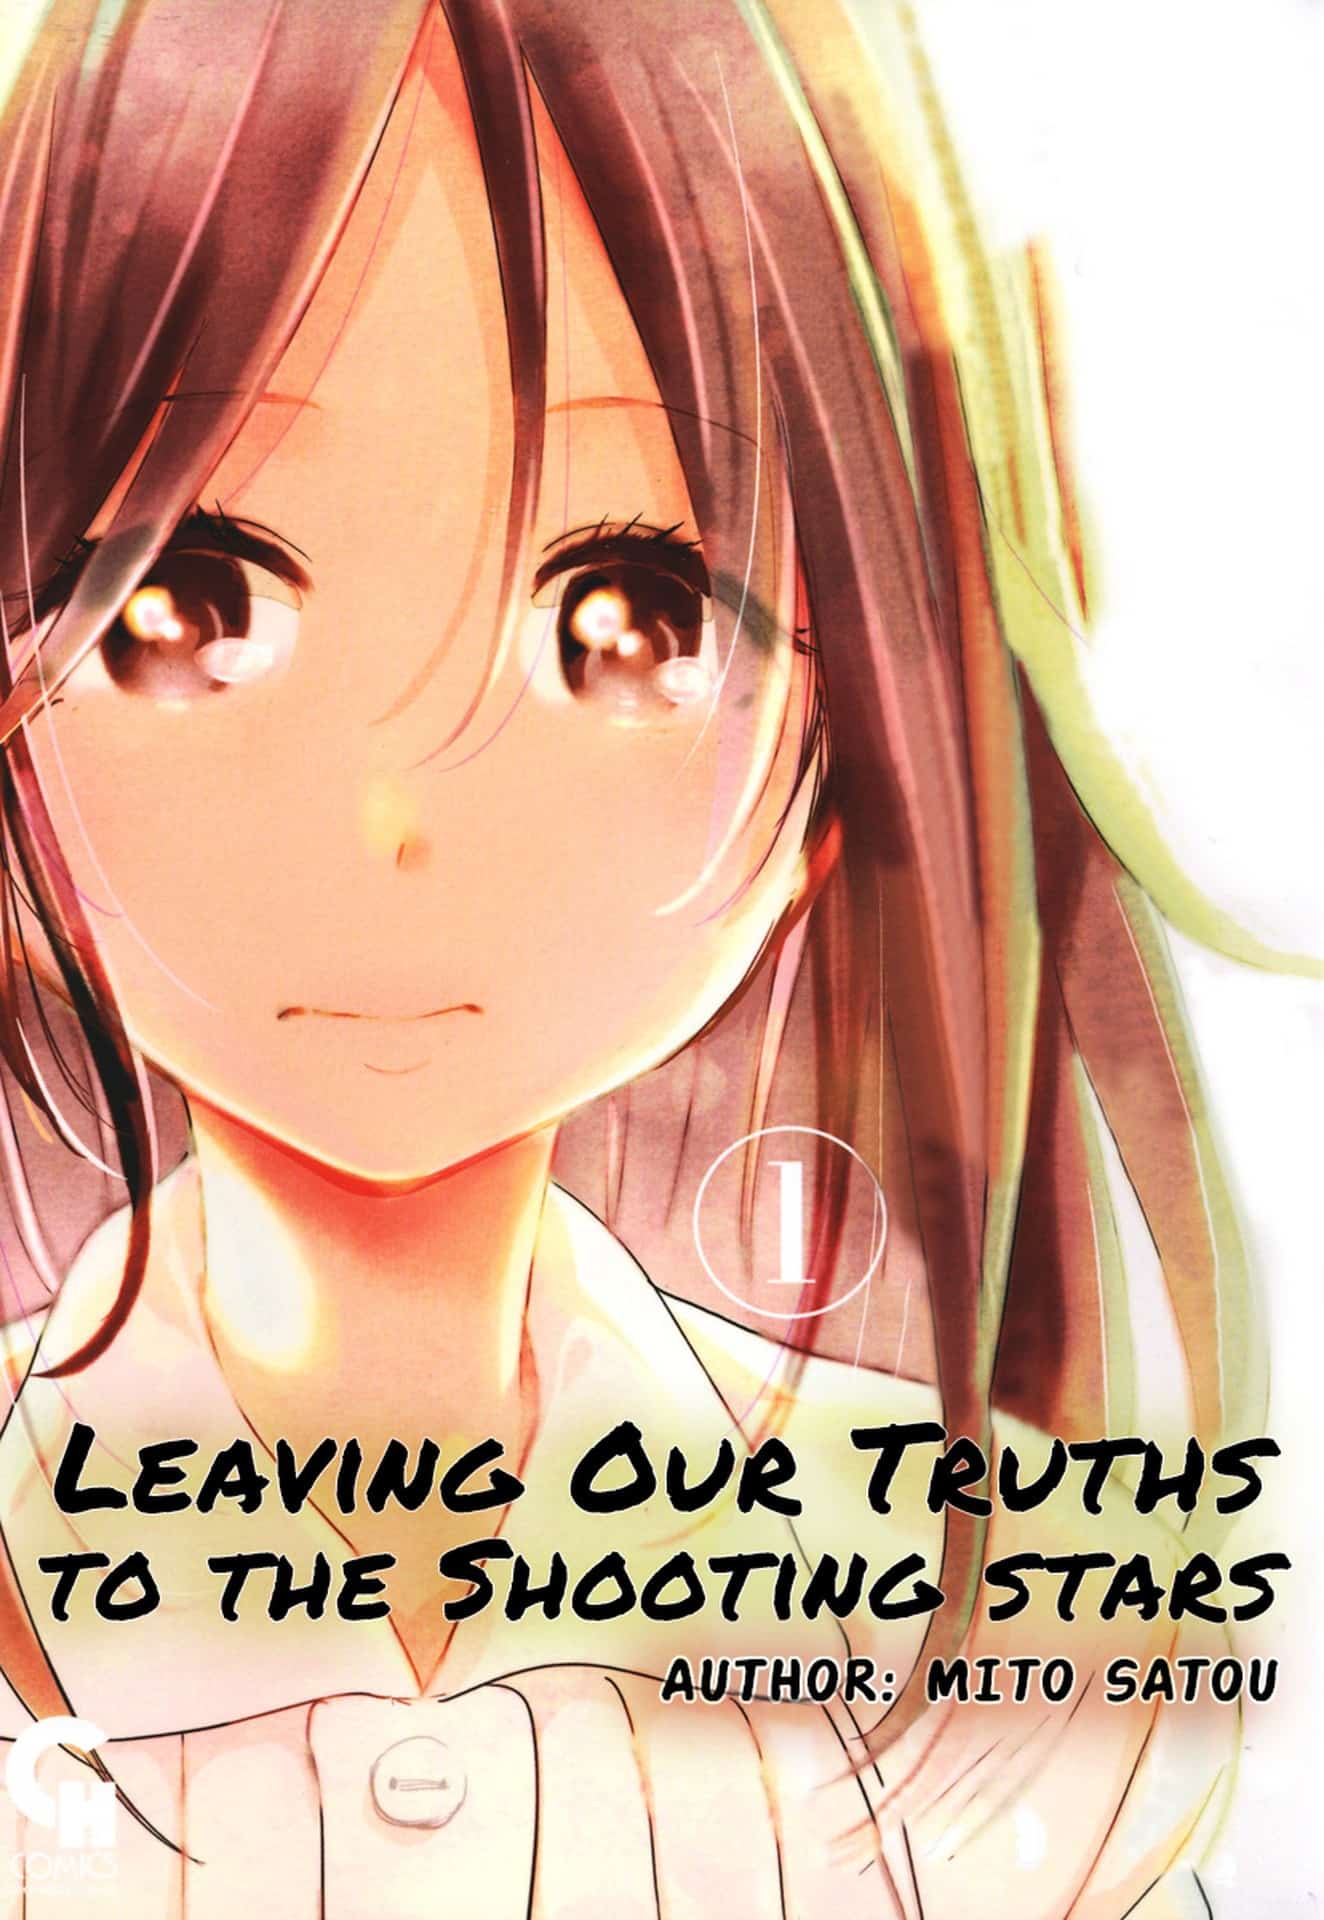 Leaving Our Truths to the Shooting Stars by Mito Satou